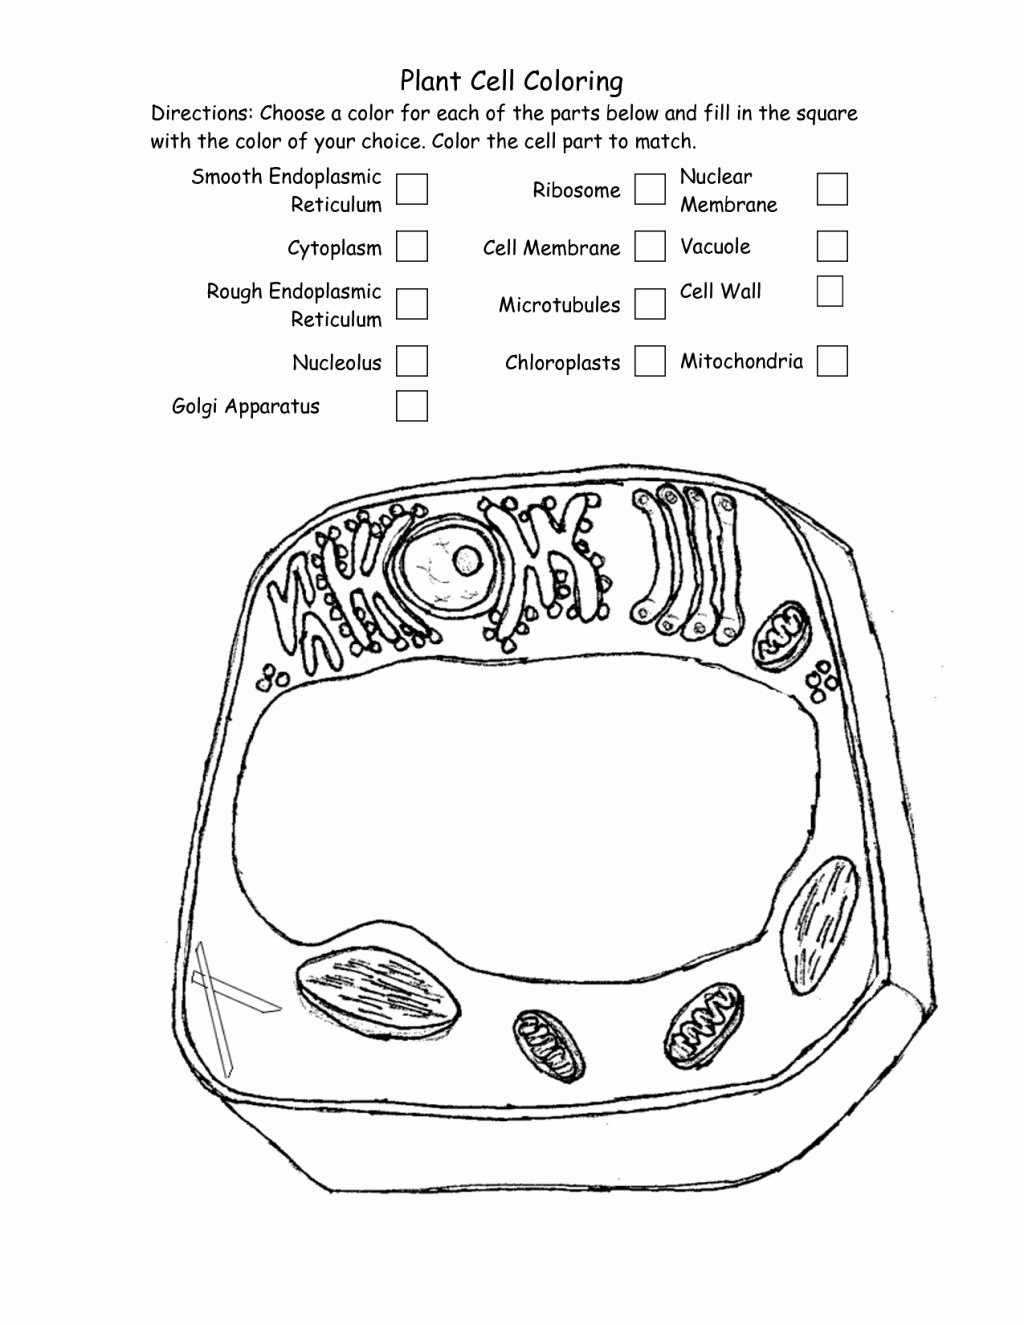 Plant Cell Coloring Worksheet Lovely Plant Cell Coloring Worksheet Answers – Coloring Pages